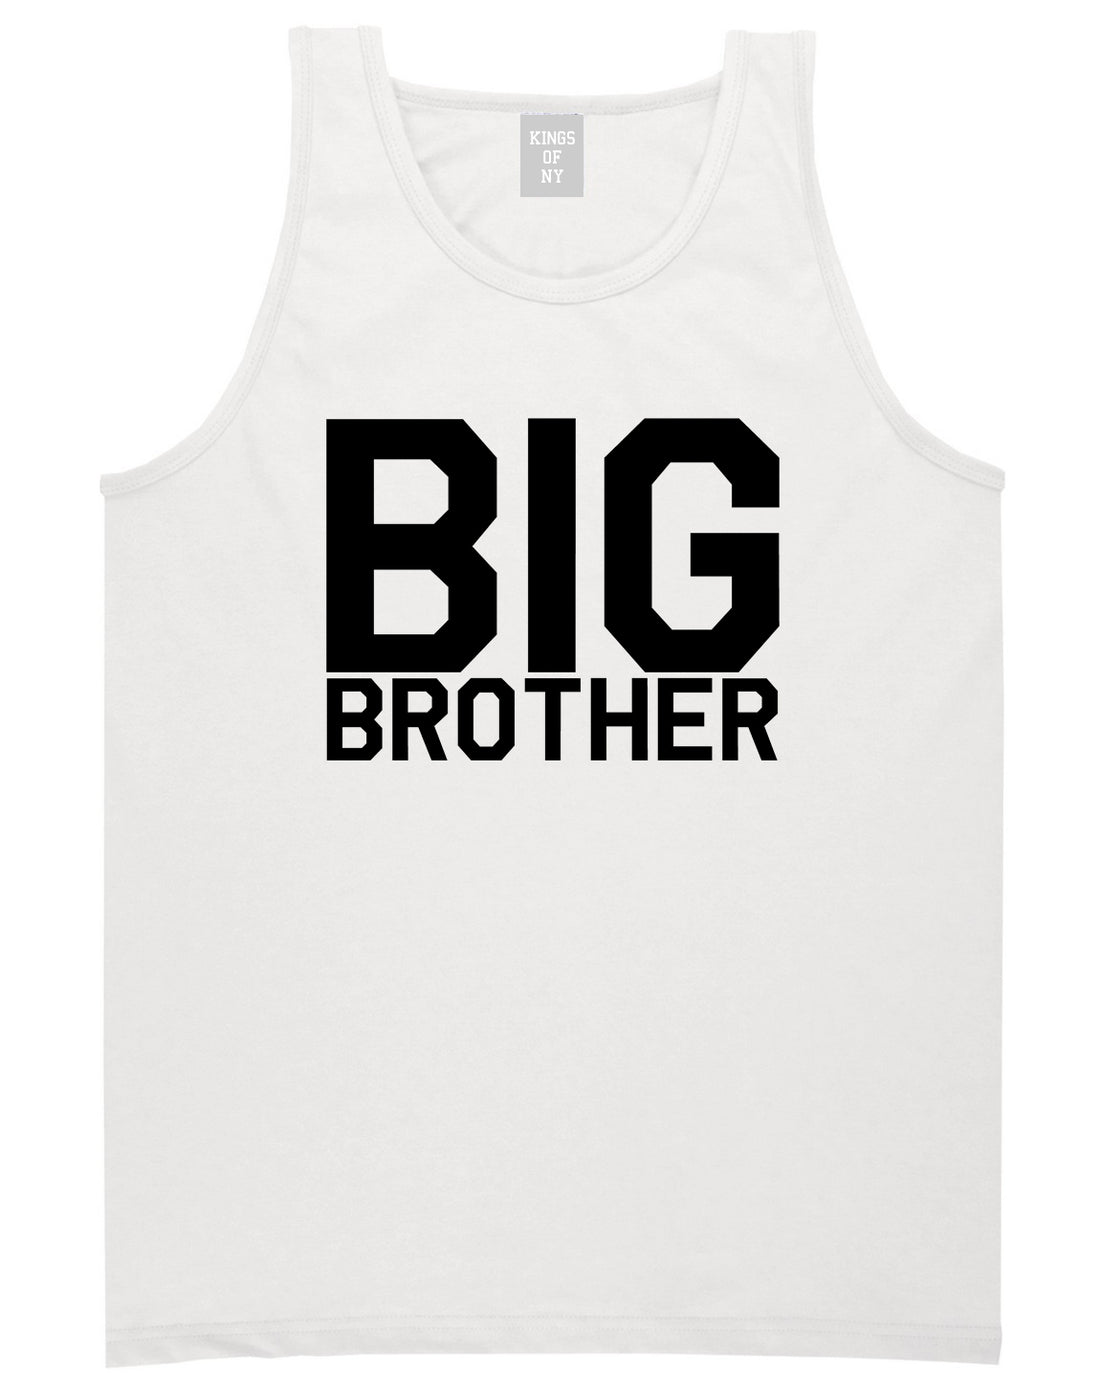 Big Brother White Tank Top Shirt by Kings Of NY